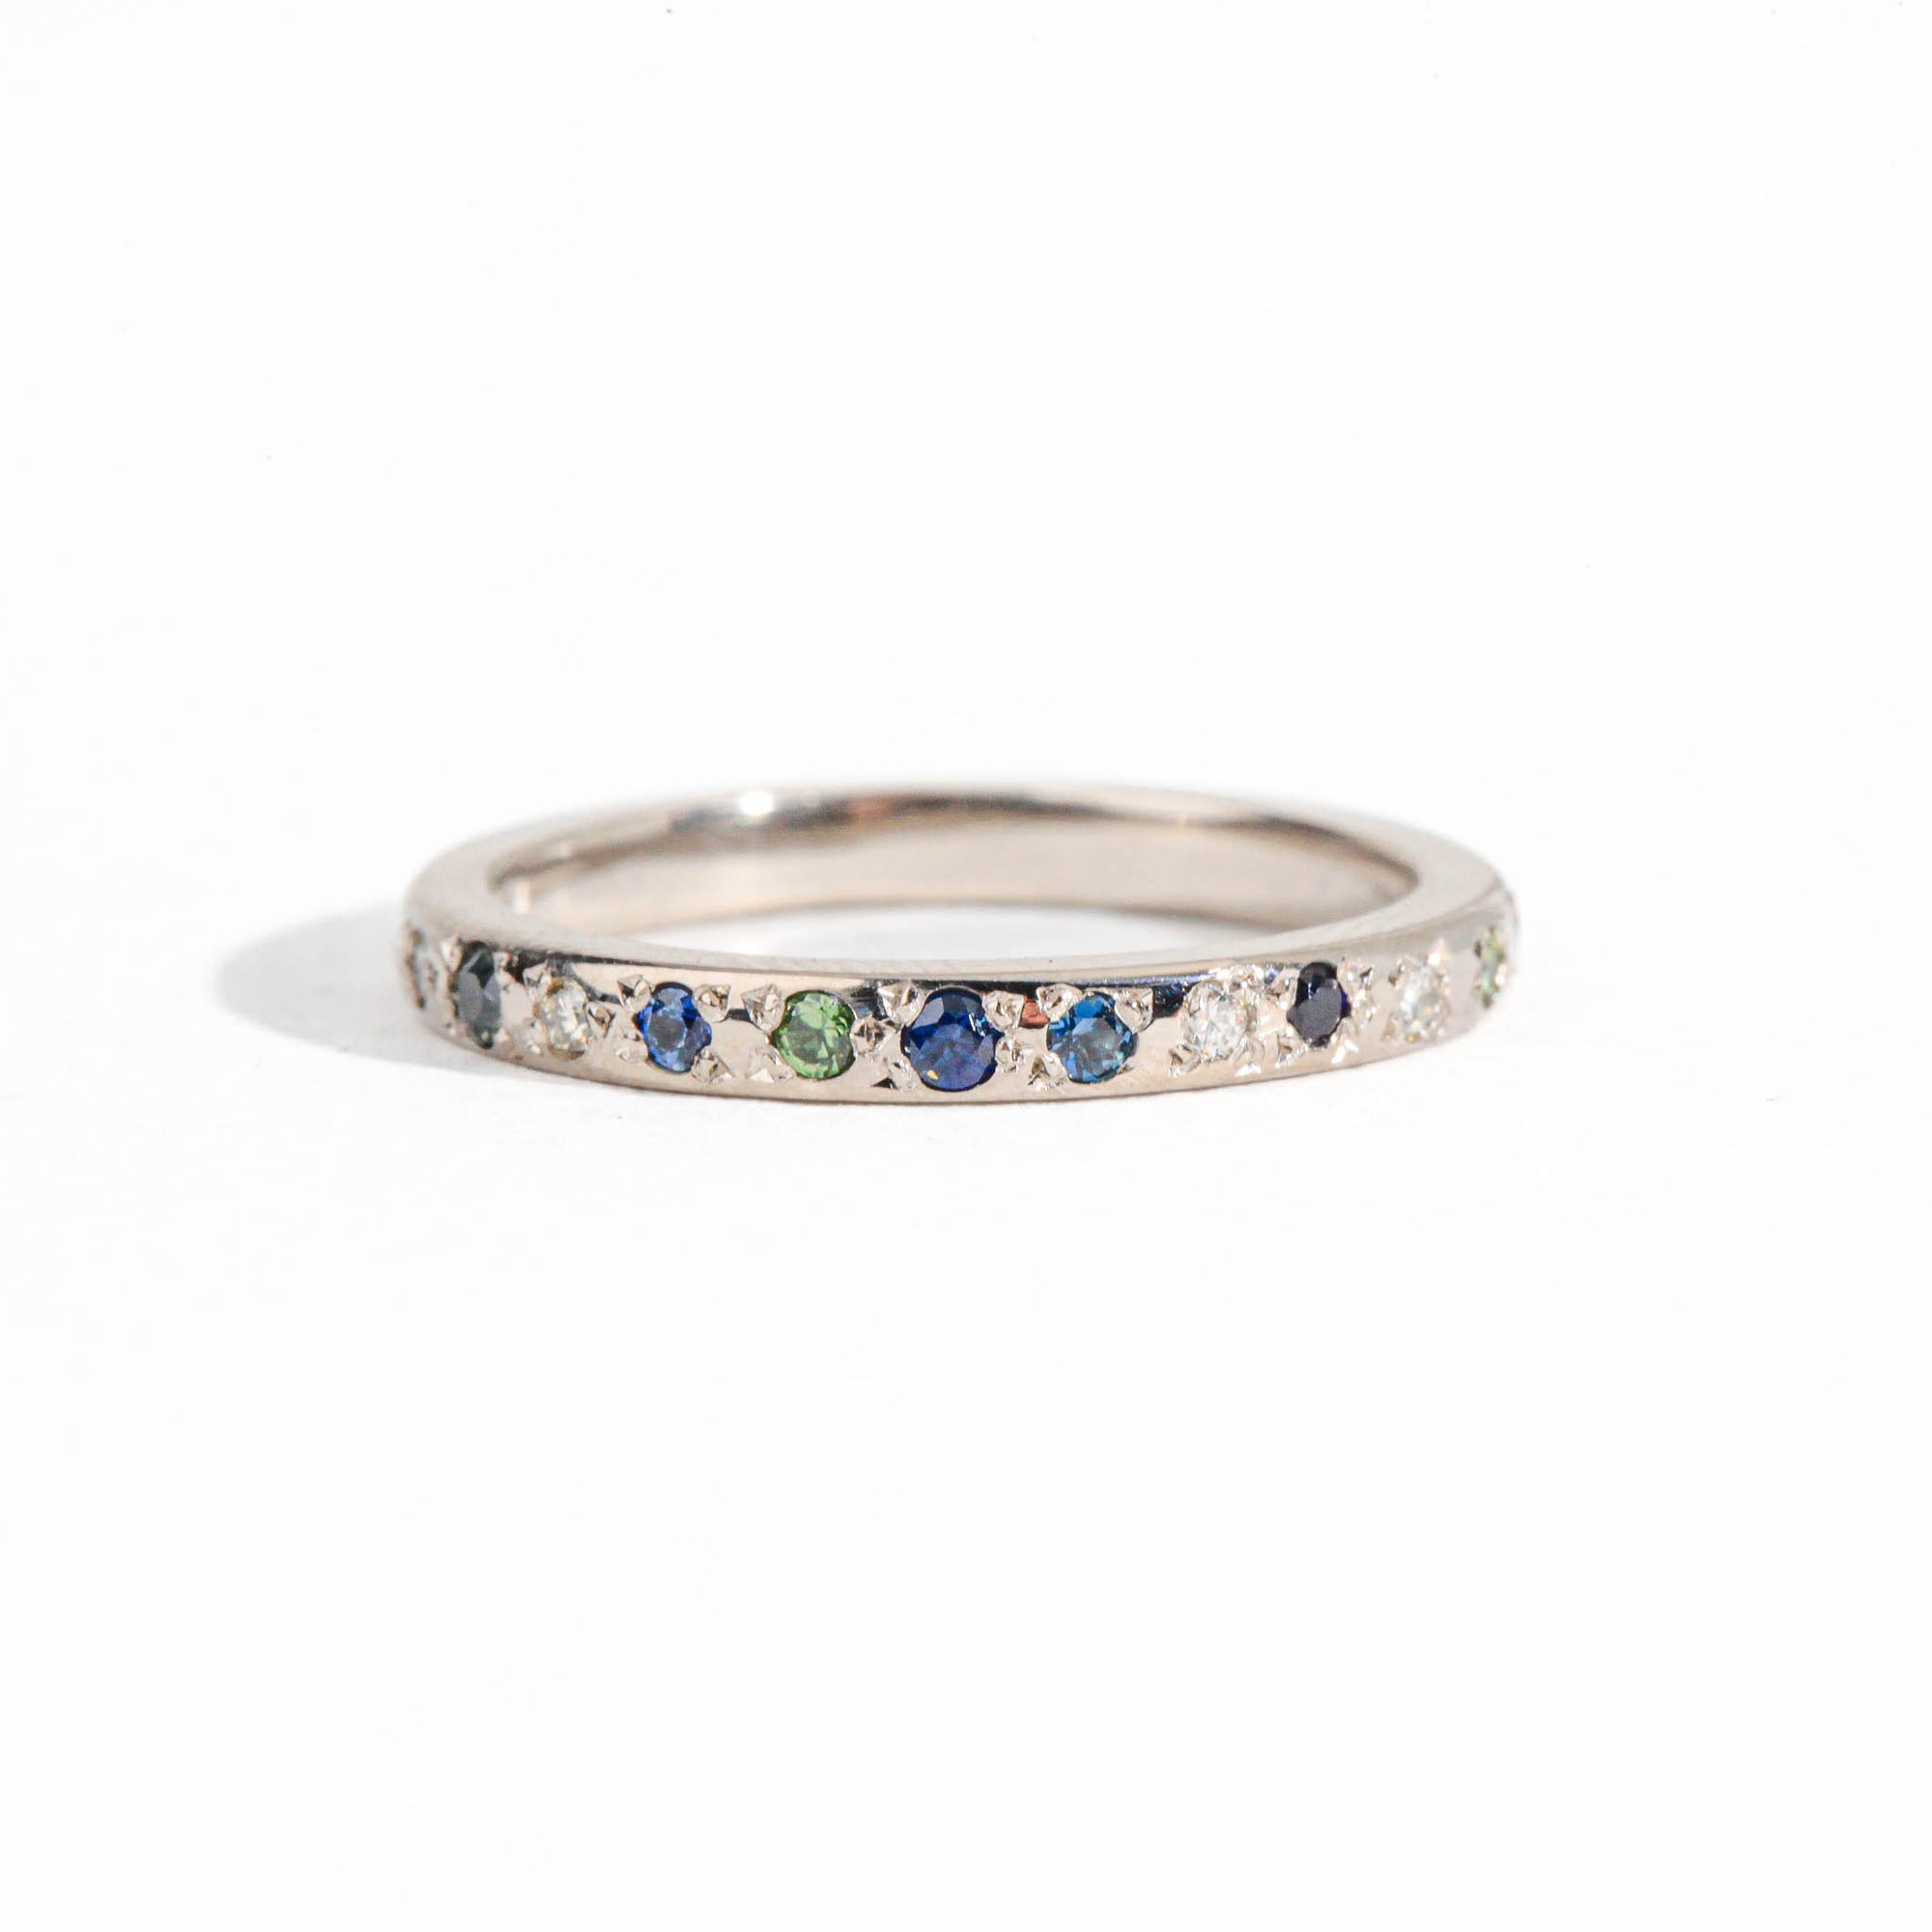 Bespoke Australian sapphire and diamond wedding band in platinum, made in Melbourne.